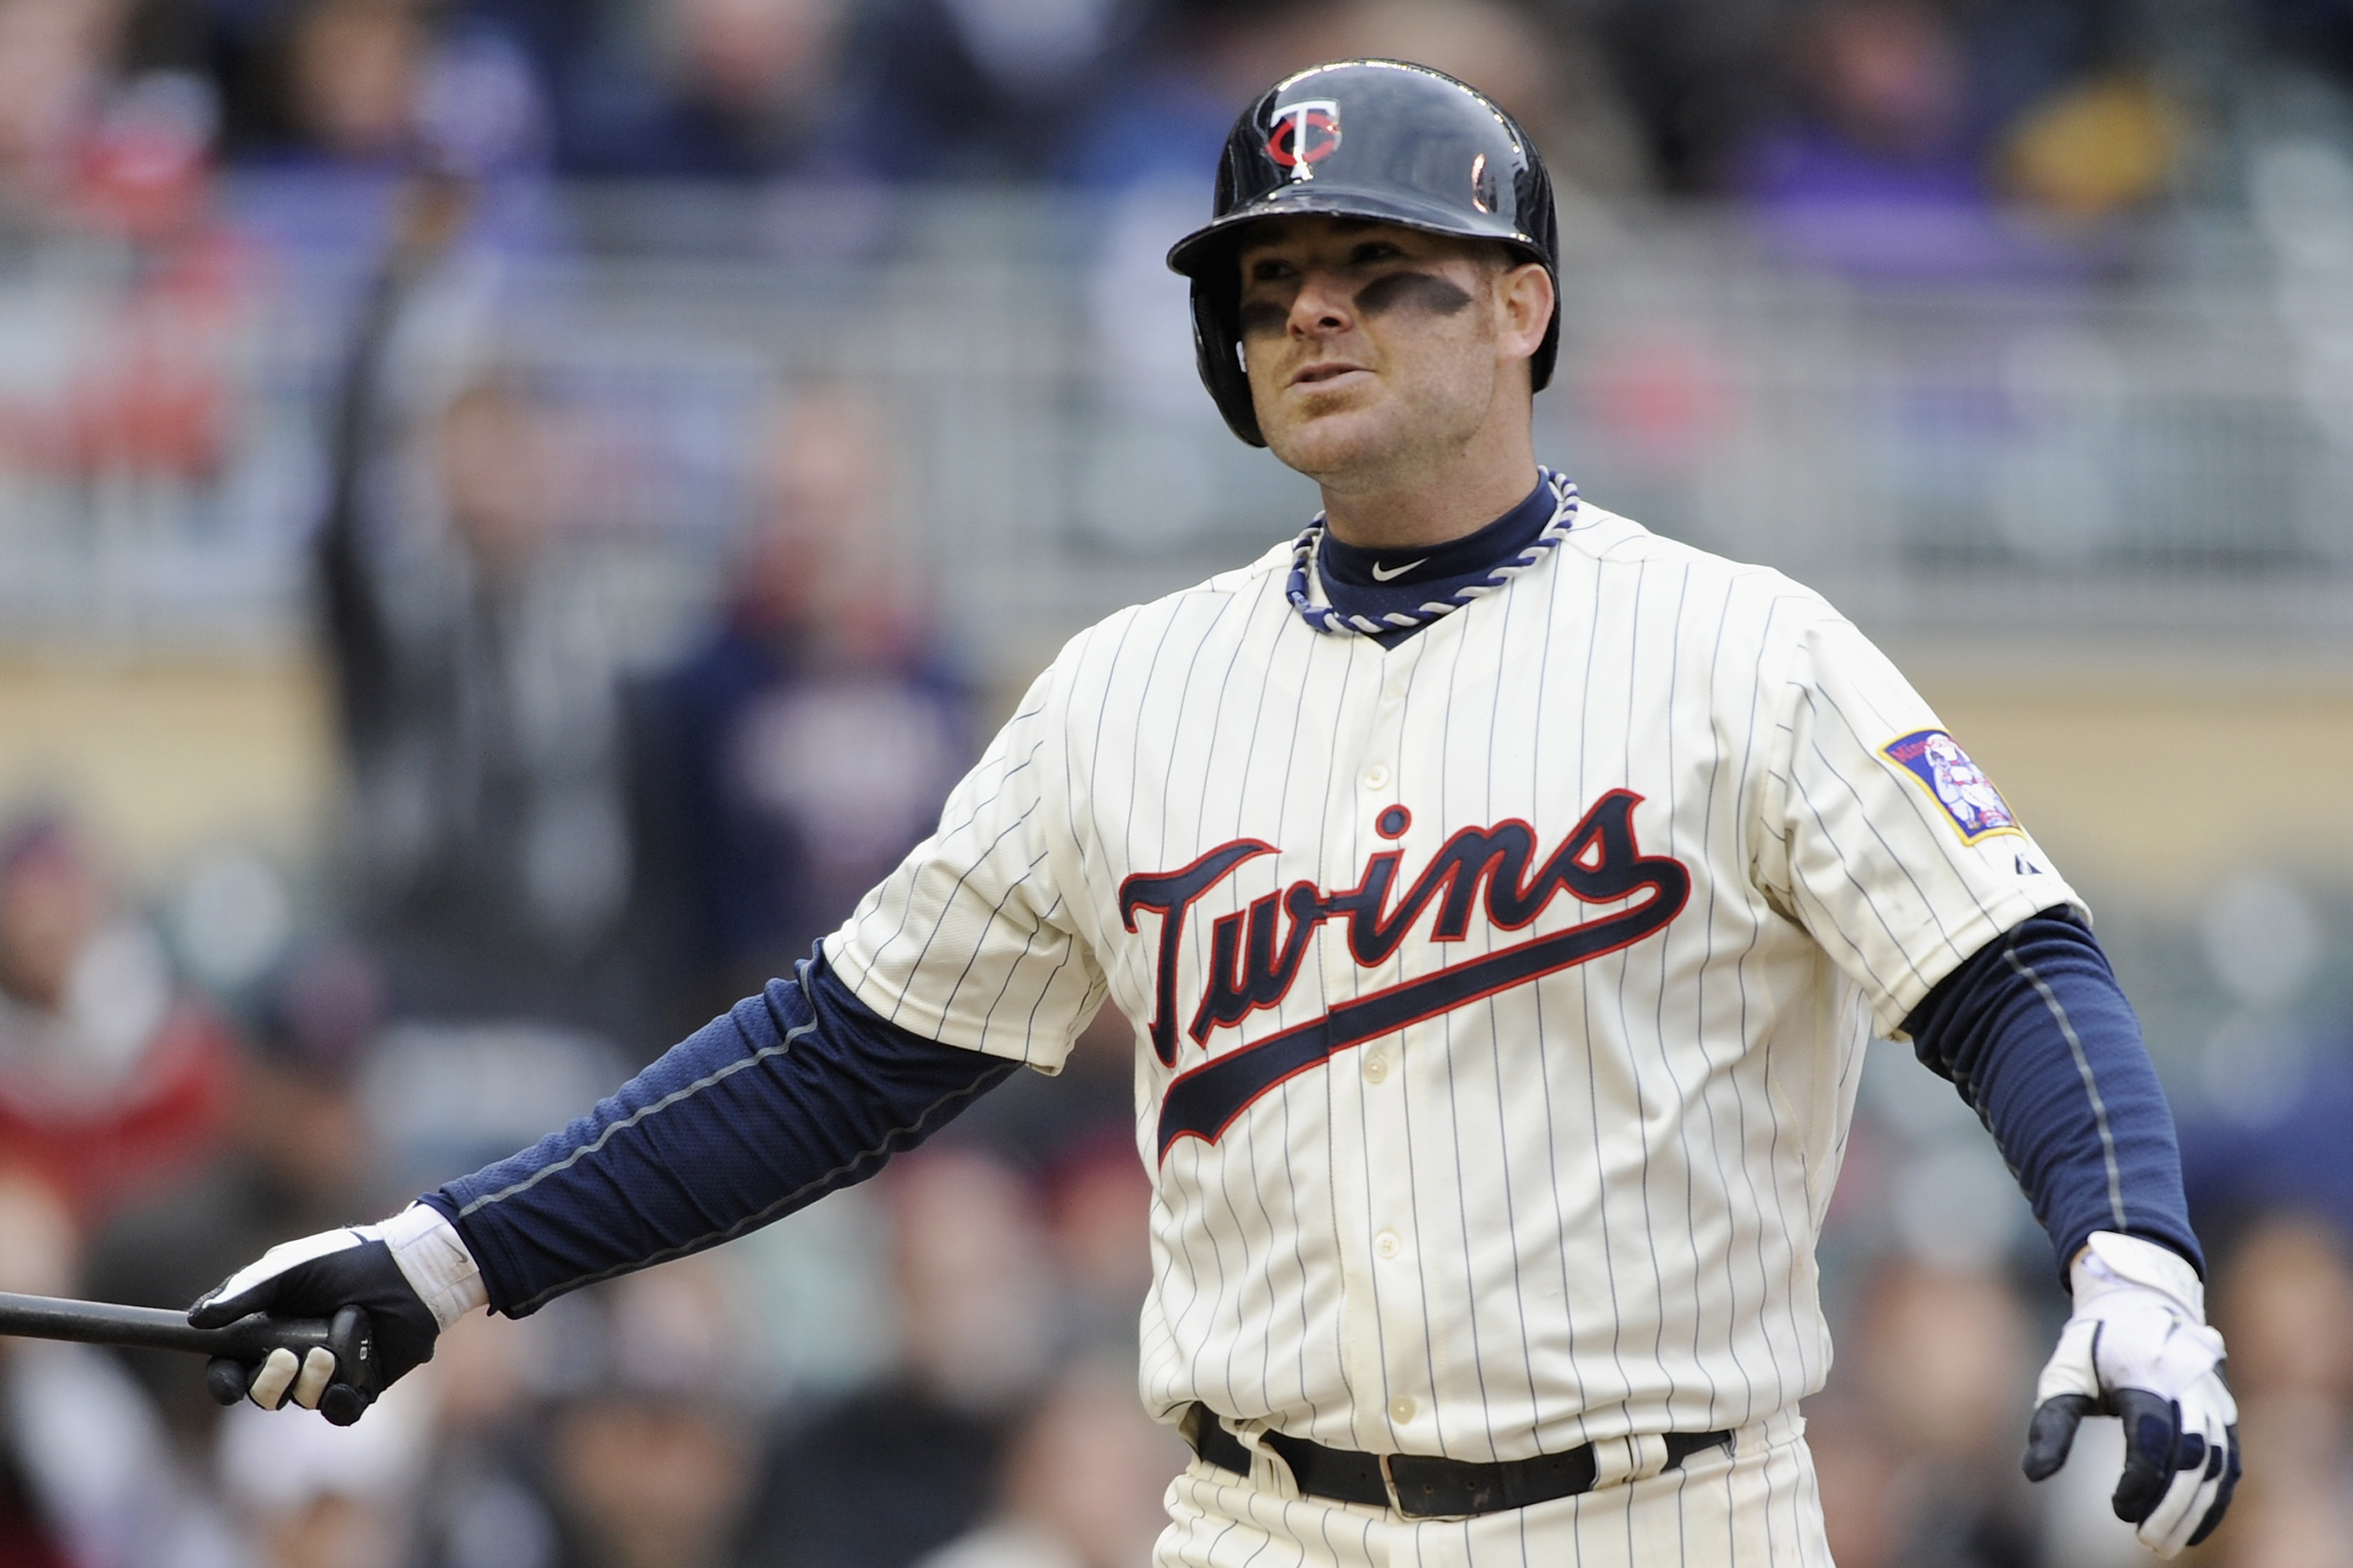 Minnesota Twins: 3 Lessons Learned from the First Two Games of the